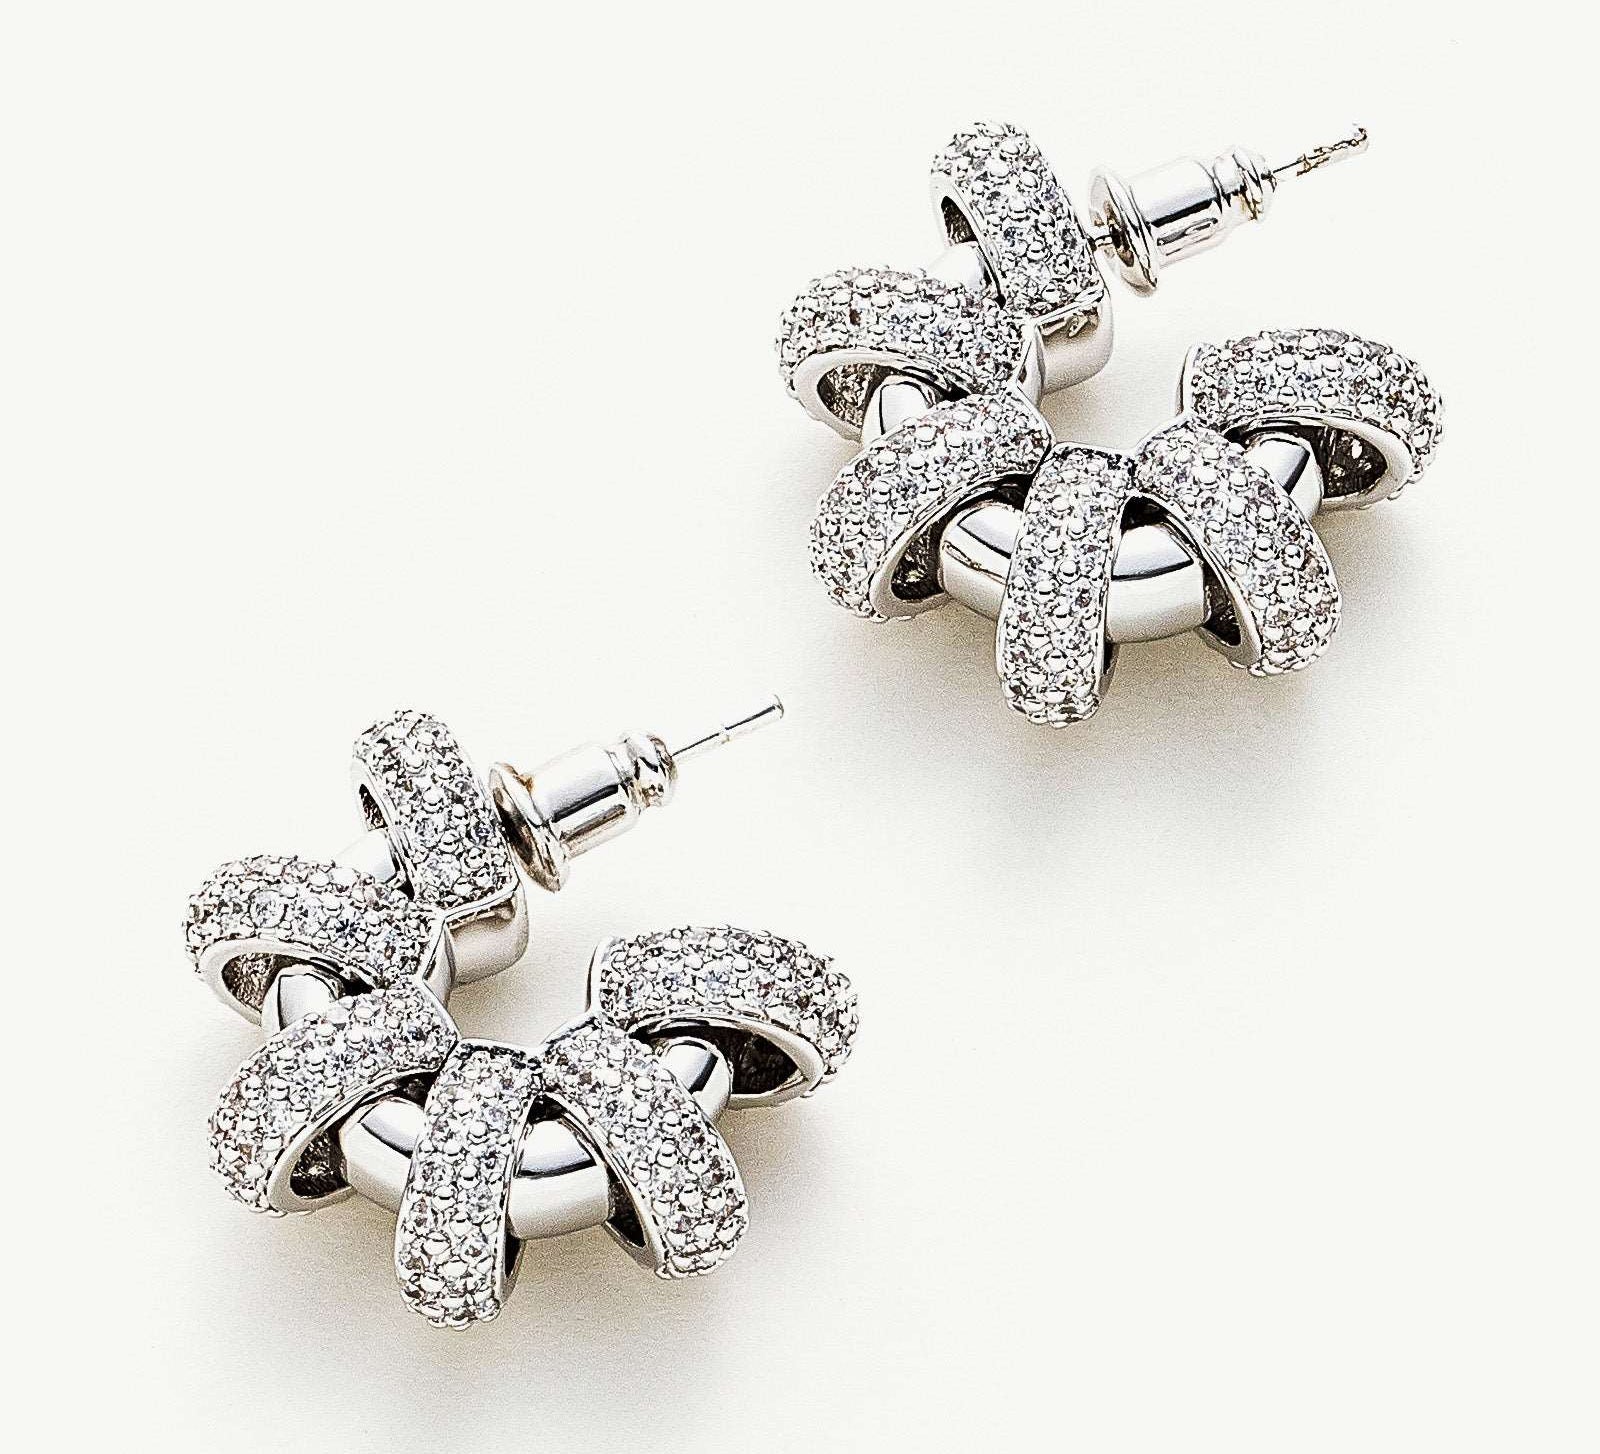 Coiled Single Earrings making an artistic statement with their coiled design, these earrings capture attention and bring a contemporary flair to your style.